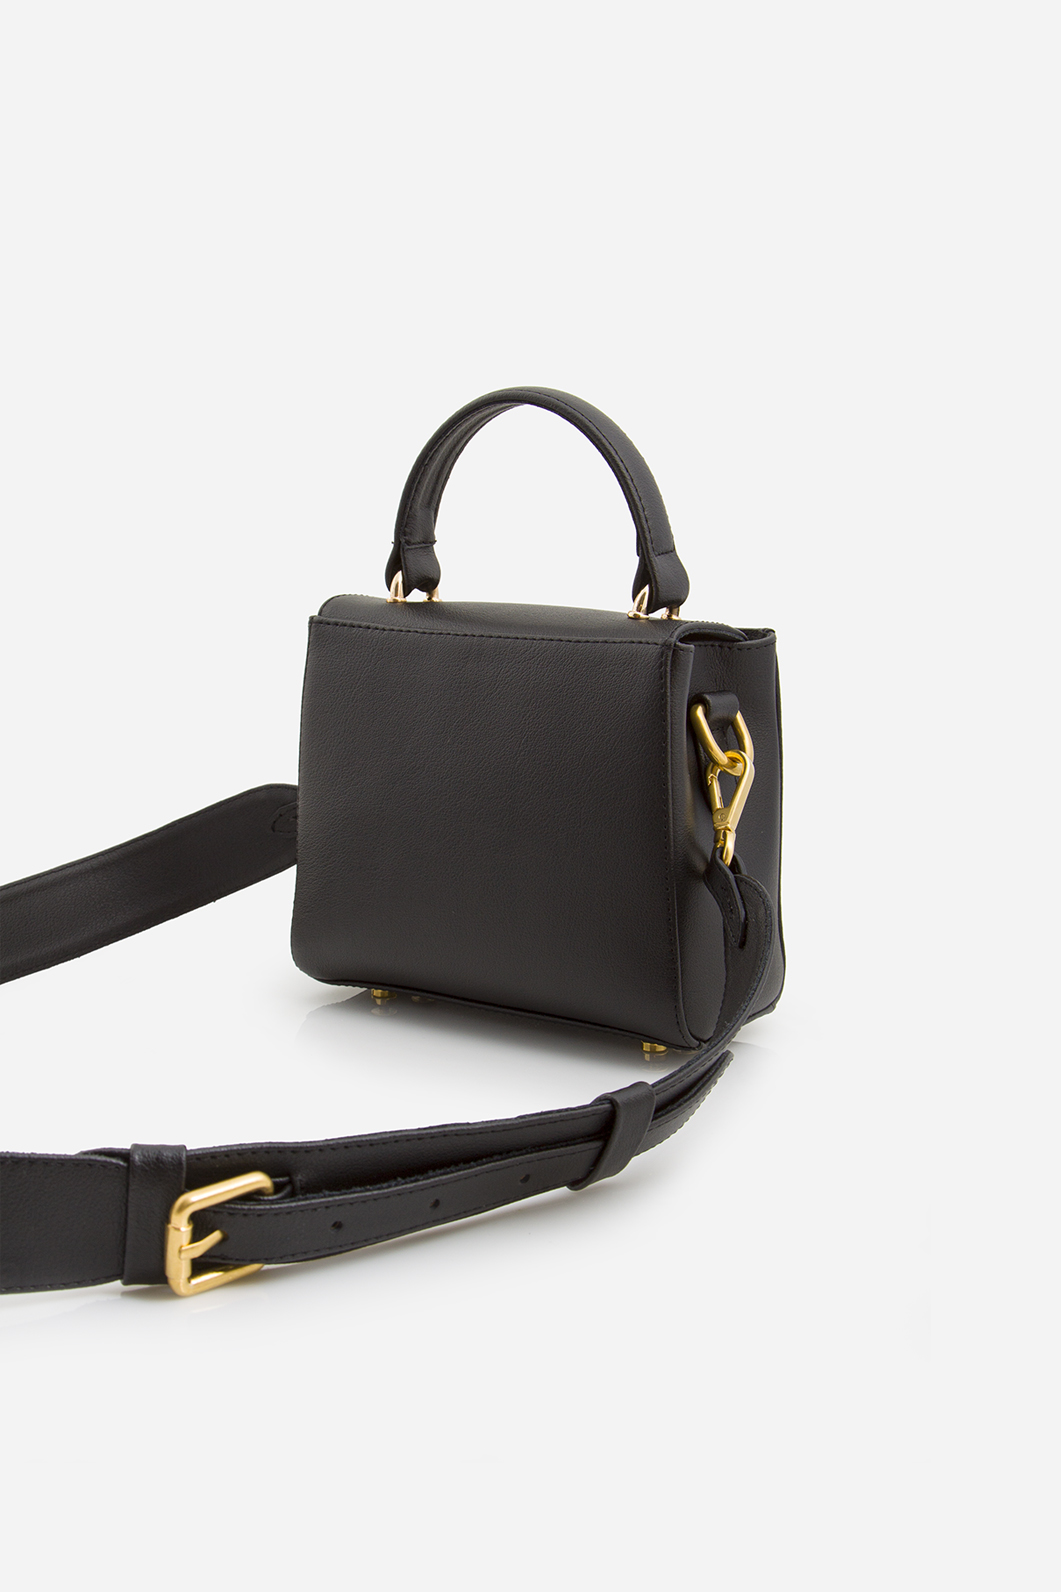 Erna micro RS black leather
city bag /gold/